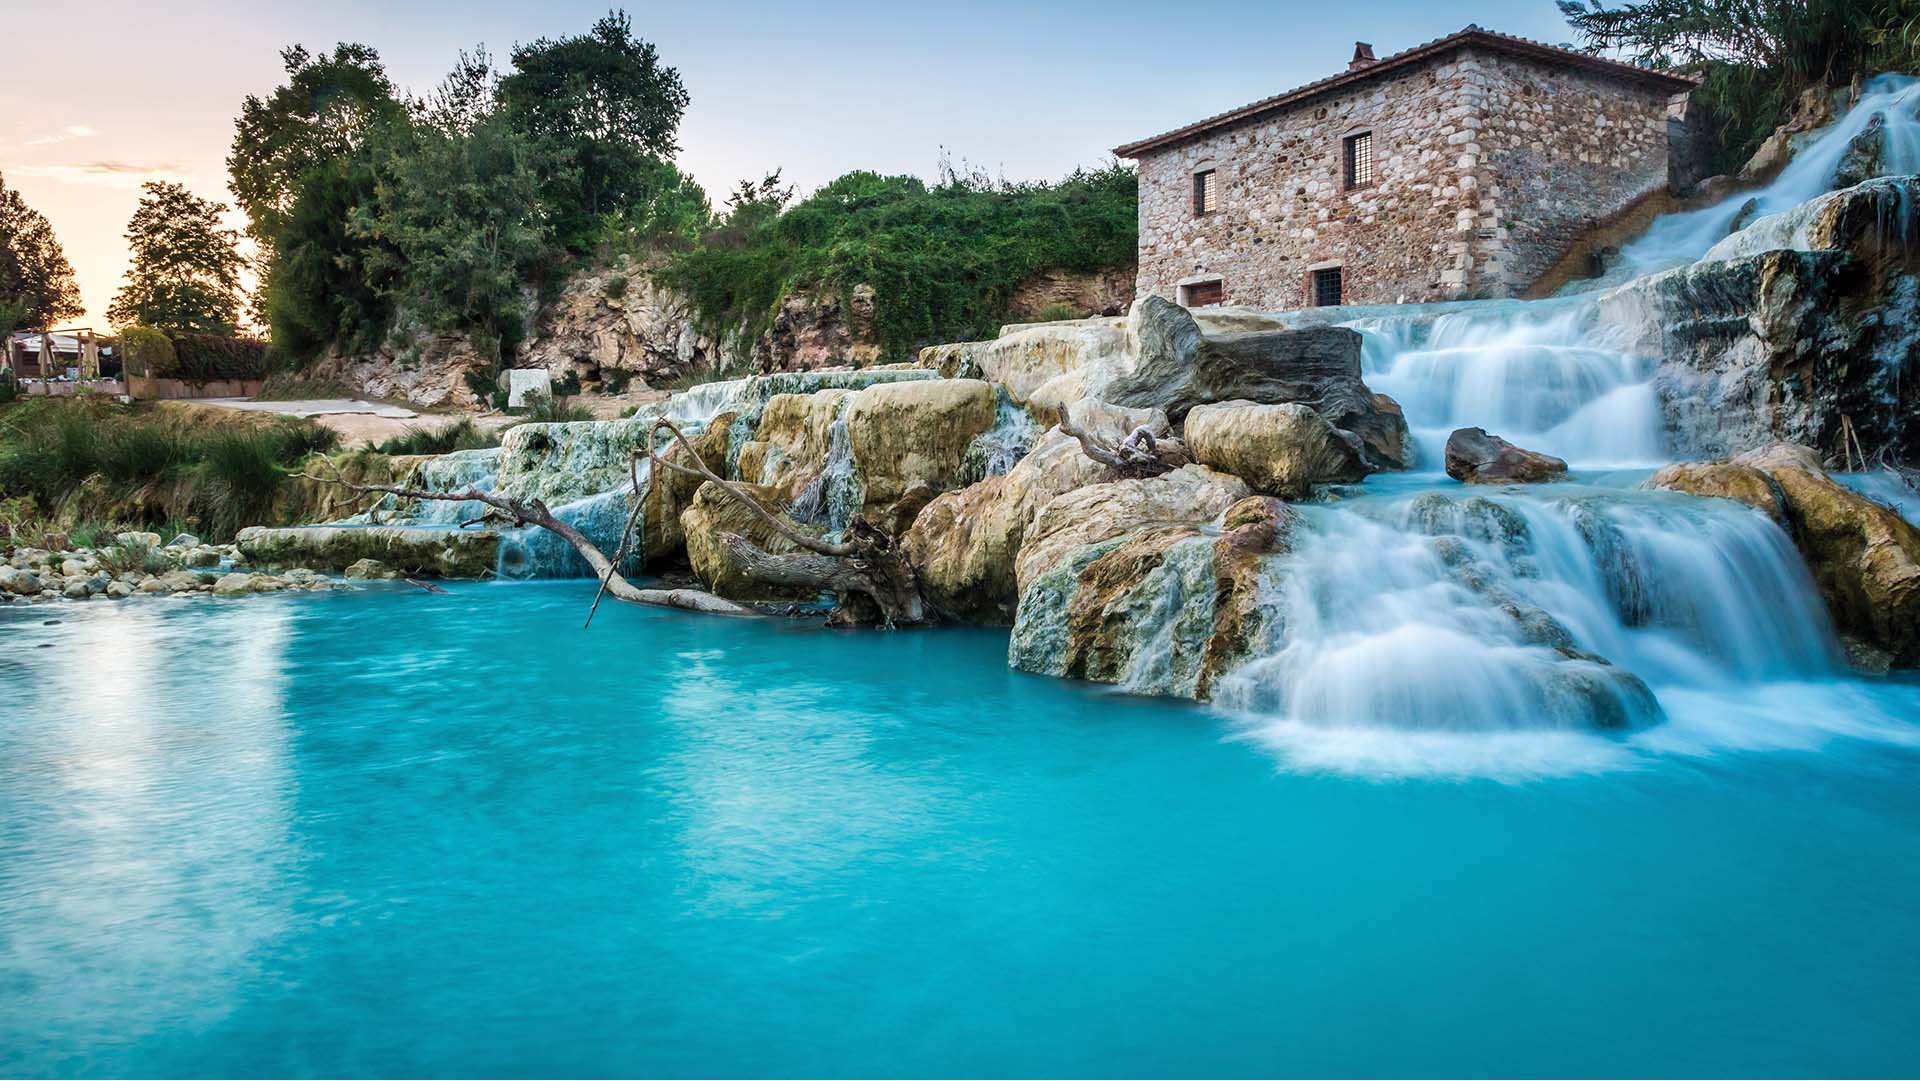 Natural spa with waterfalls in Tuscany, Italy.